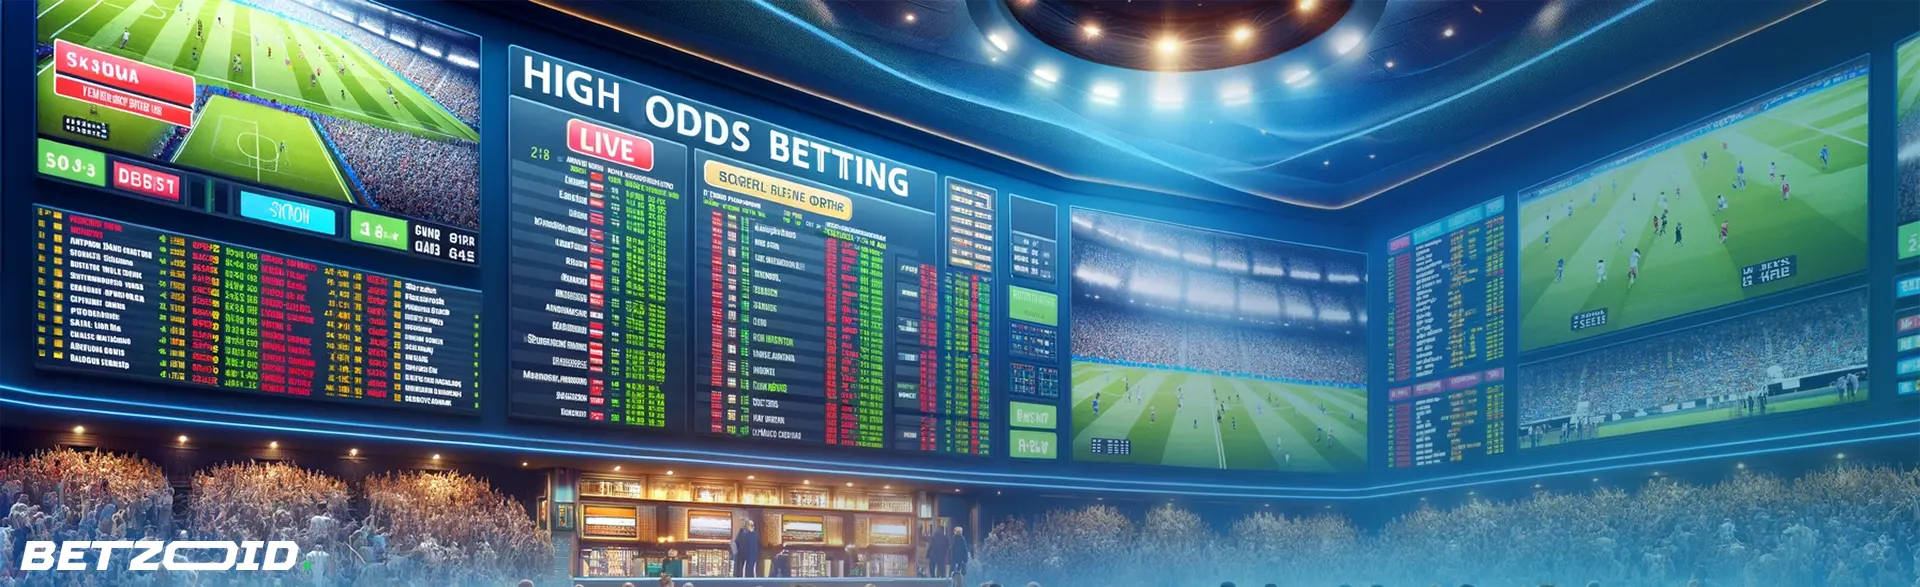 Betting screens displaying high odds for bookies catering to Canadians